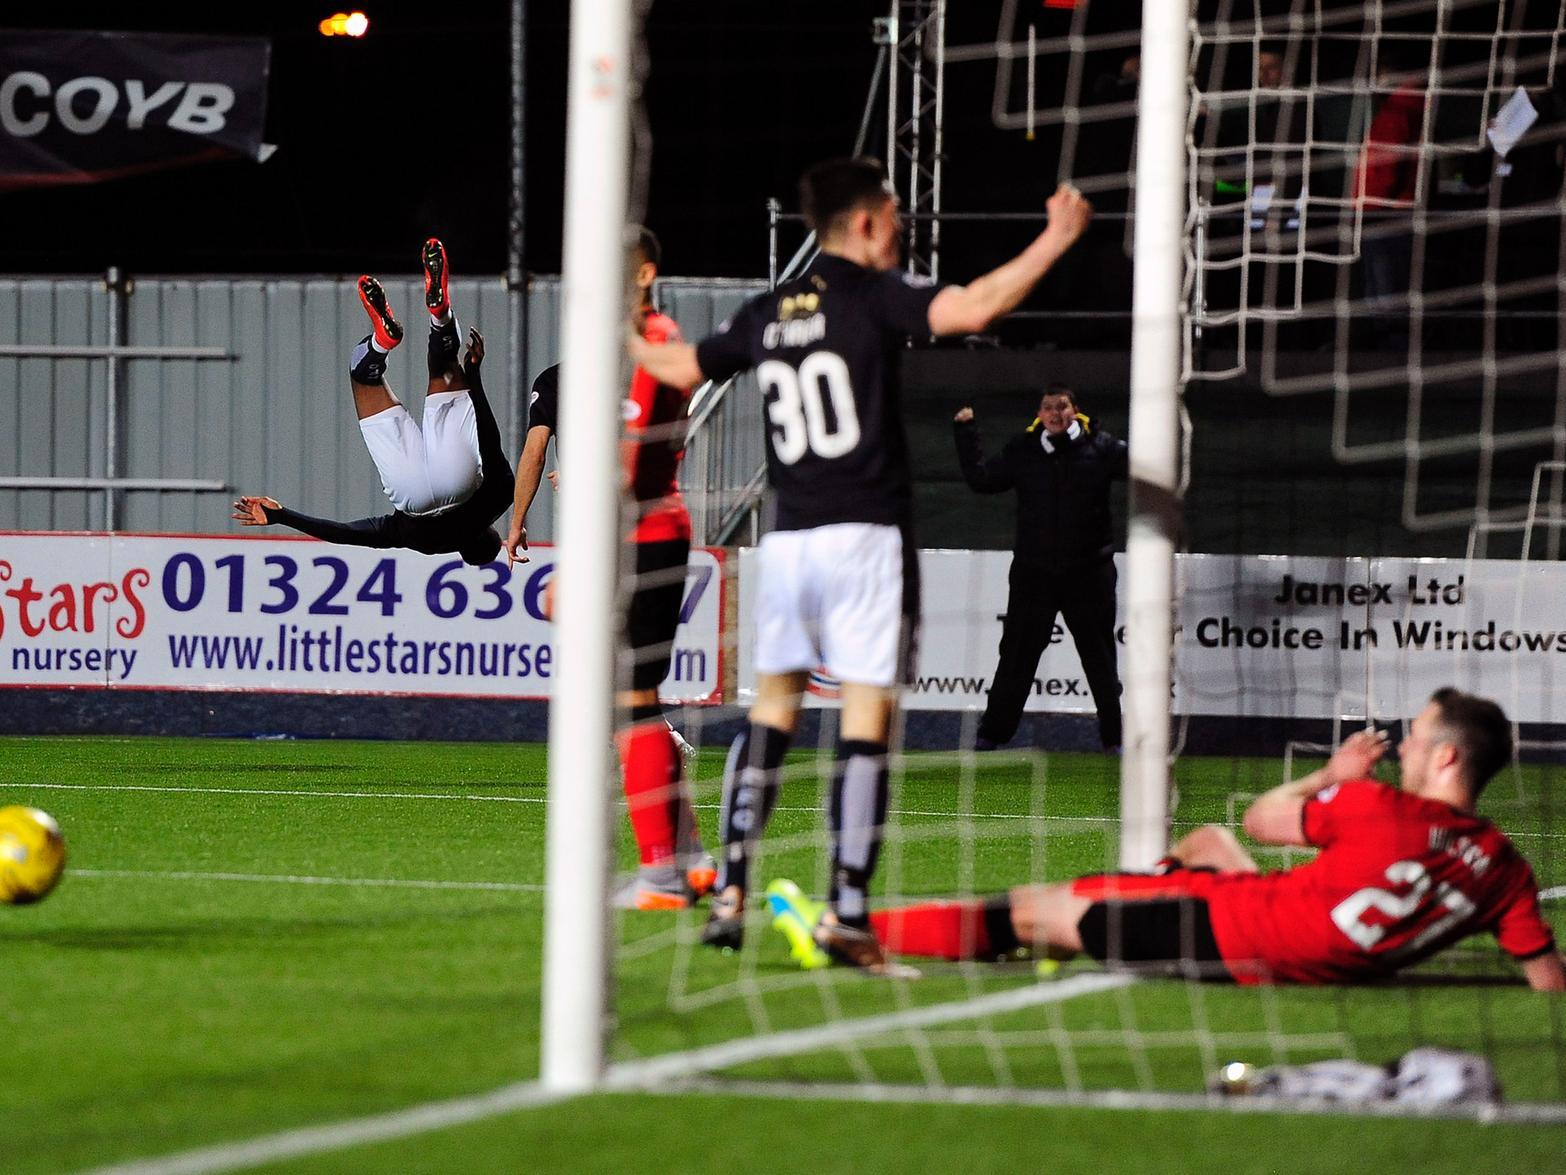 March 18, 2016. Oh what a night! The second half entry of Myles Hioppolyte overturned Rangers' lead and a typically late Bob McHugh goal won it for Falkirk.